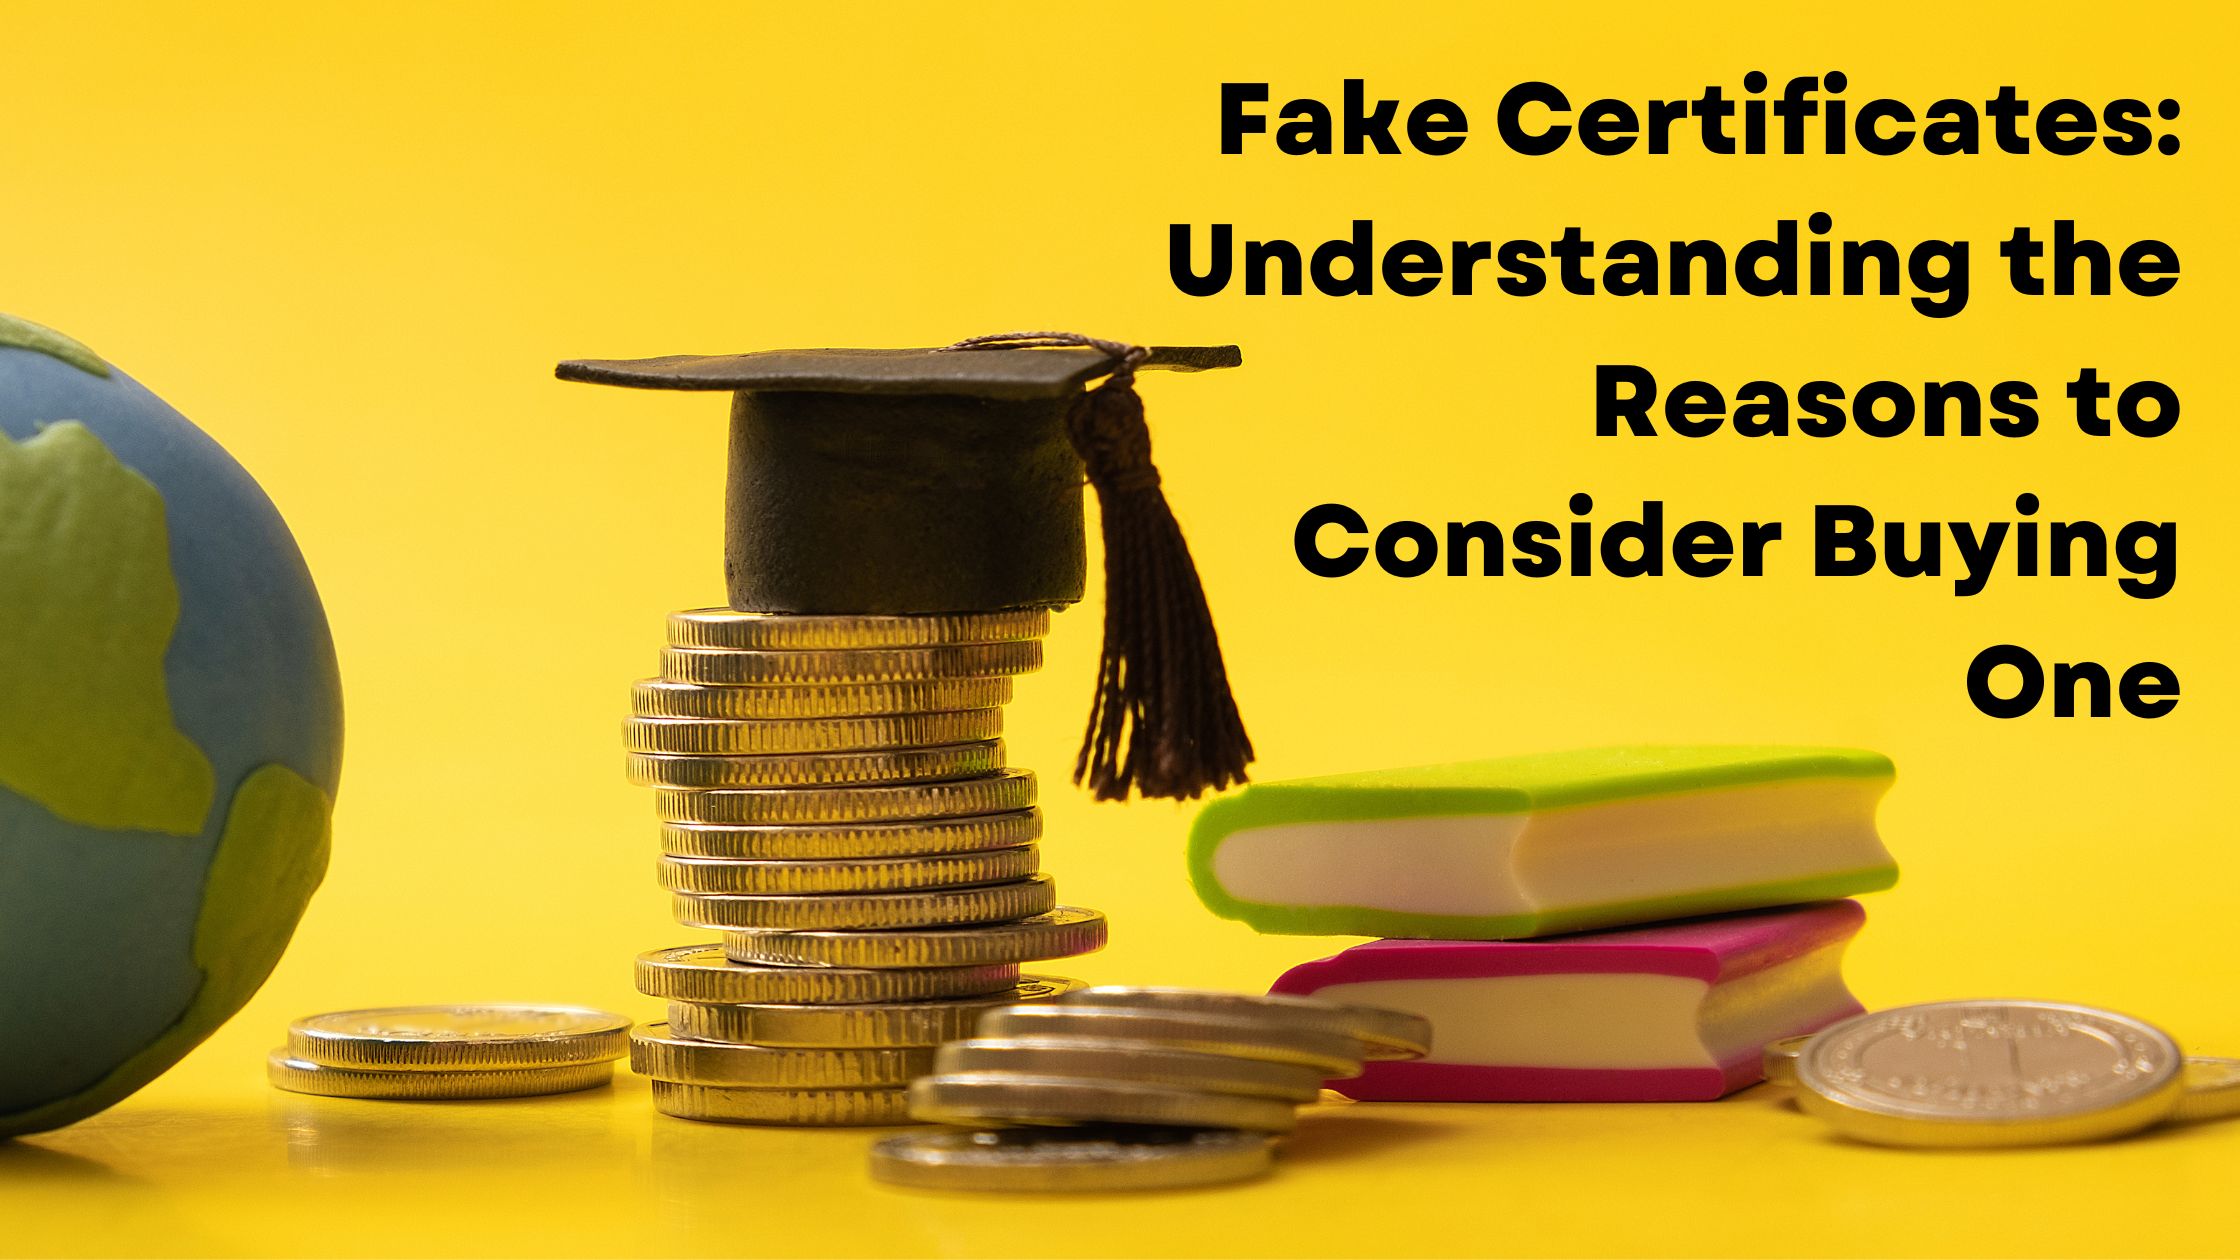 Fake Certificates: Understanding the Reasons to Consider Buying One